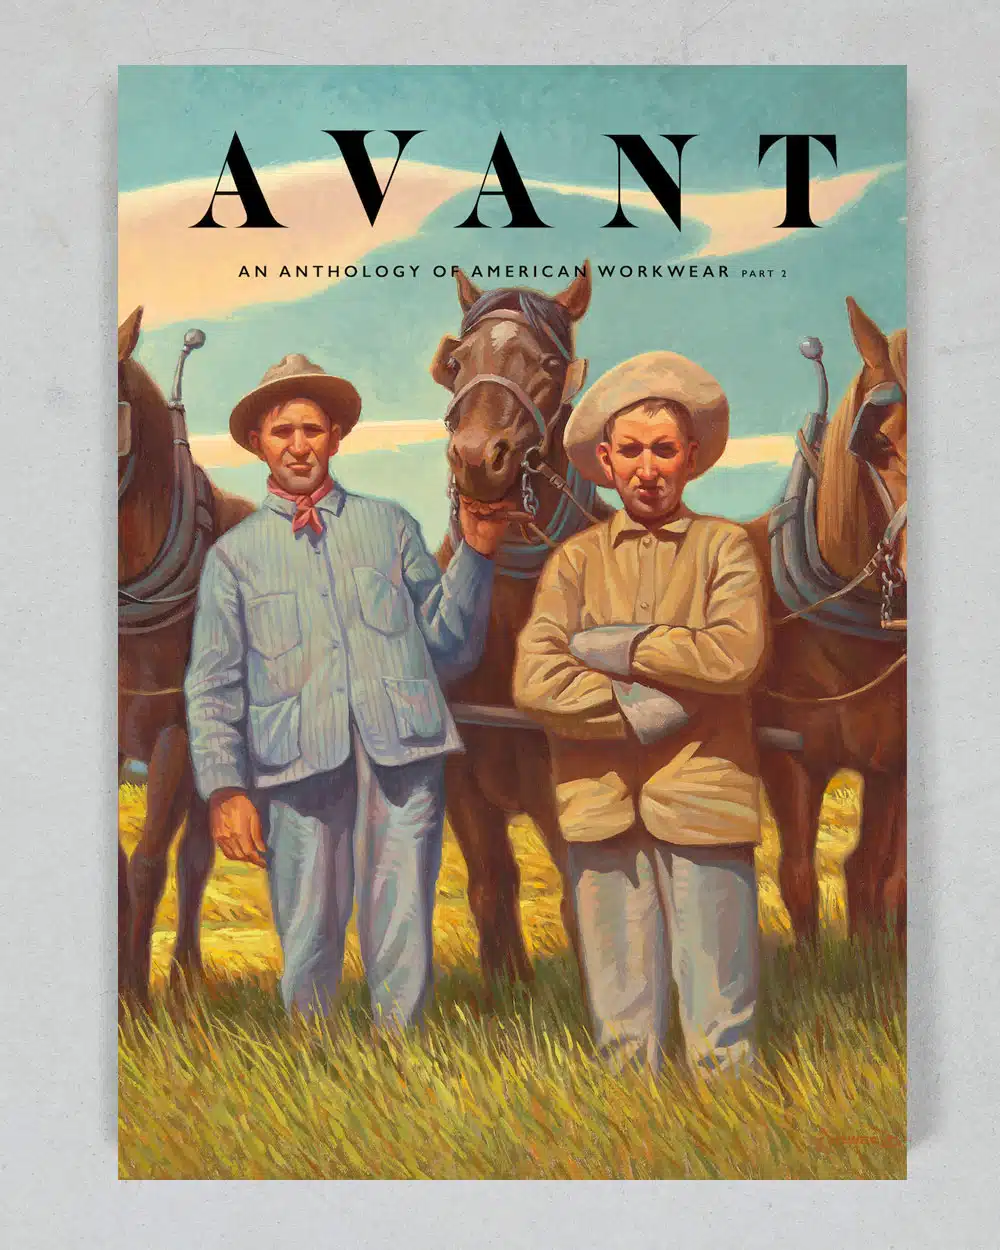 AVANT Magazine Issue 4: An Anthology of American Workwear Part 2